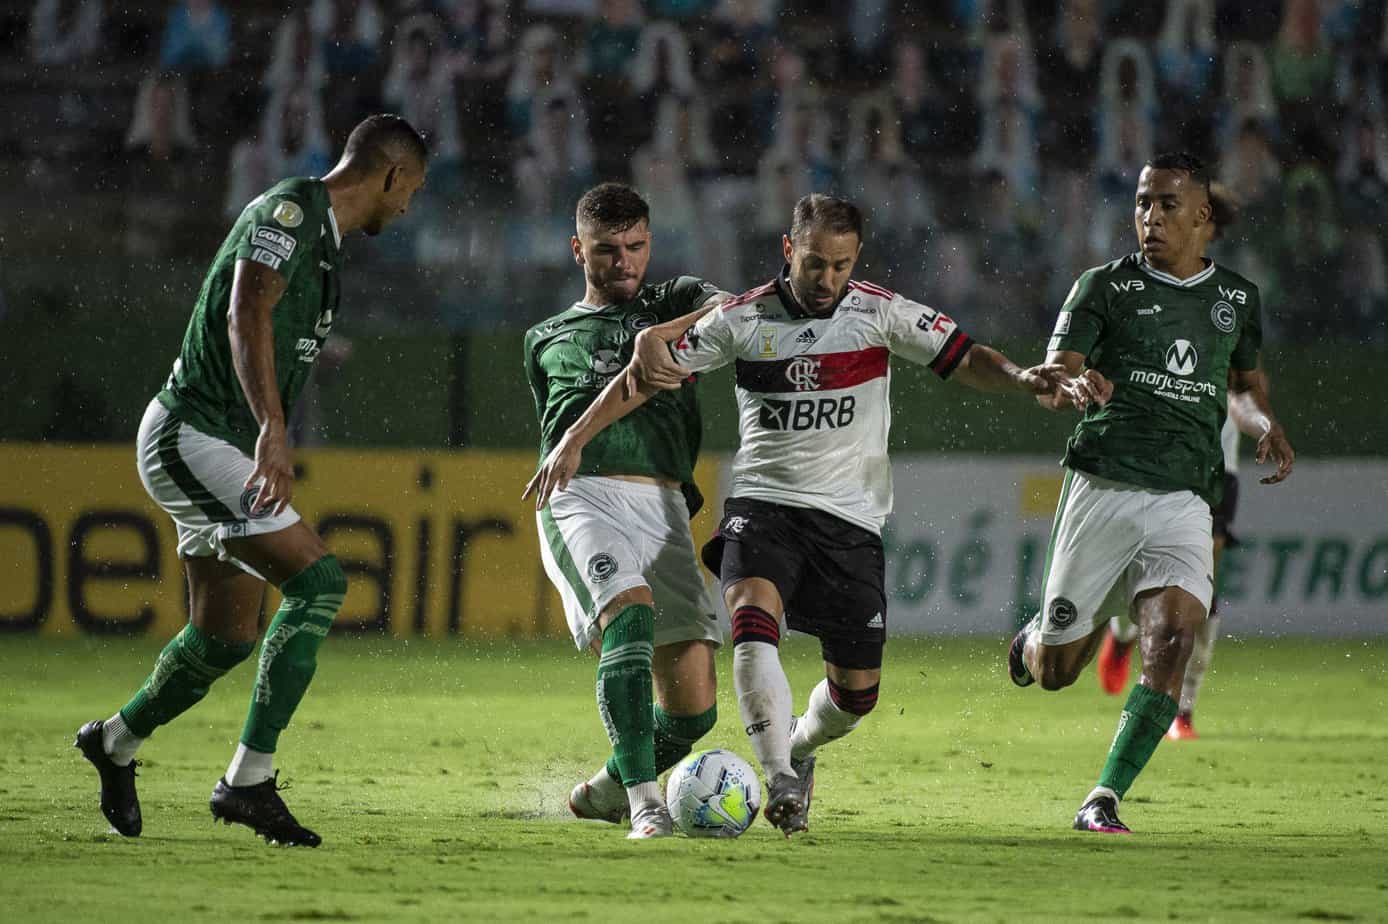 Goiás vs. Flamengo – Betting Odds and Free Pick